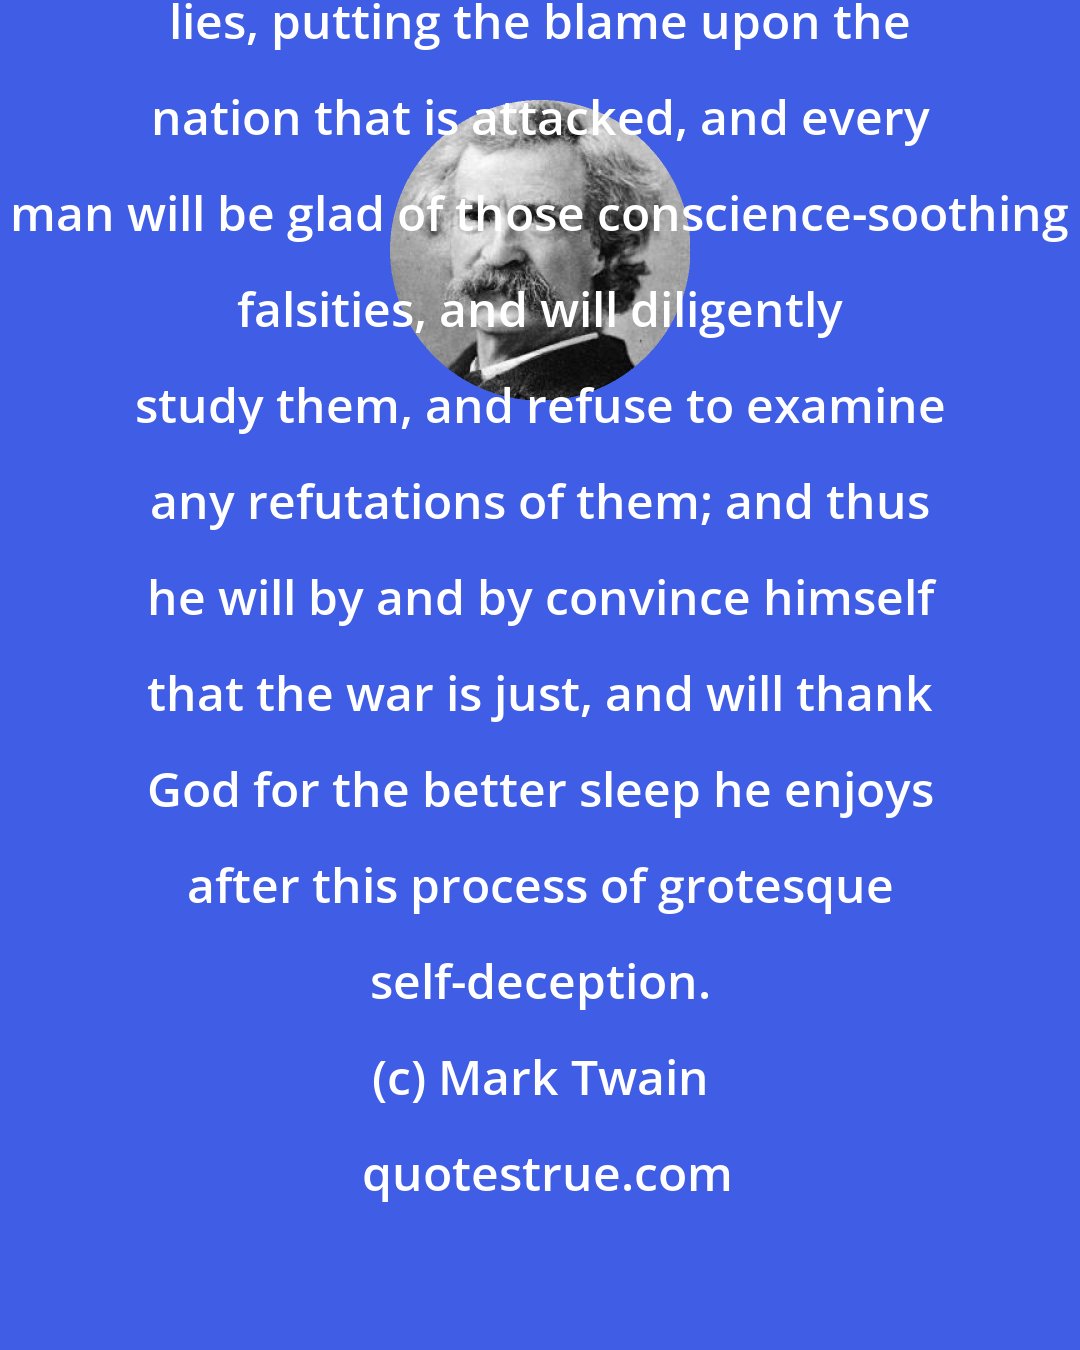 Mark Twain: The statesmen will invent cheap lies, putting the blame upon the nation that is attacked, and every man will be glad of those conscience-soothing falsities, and will diligently study them, and refuse to examine any refutations of them; and thus he will by and by convince himself that the war is just, and will thank God for the better sleep he enjoys after this process of grotesque self-deception.